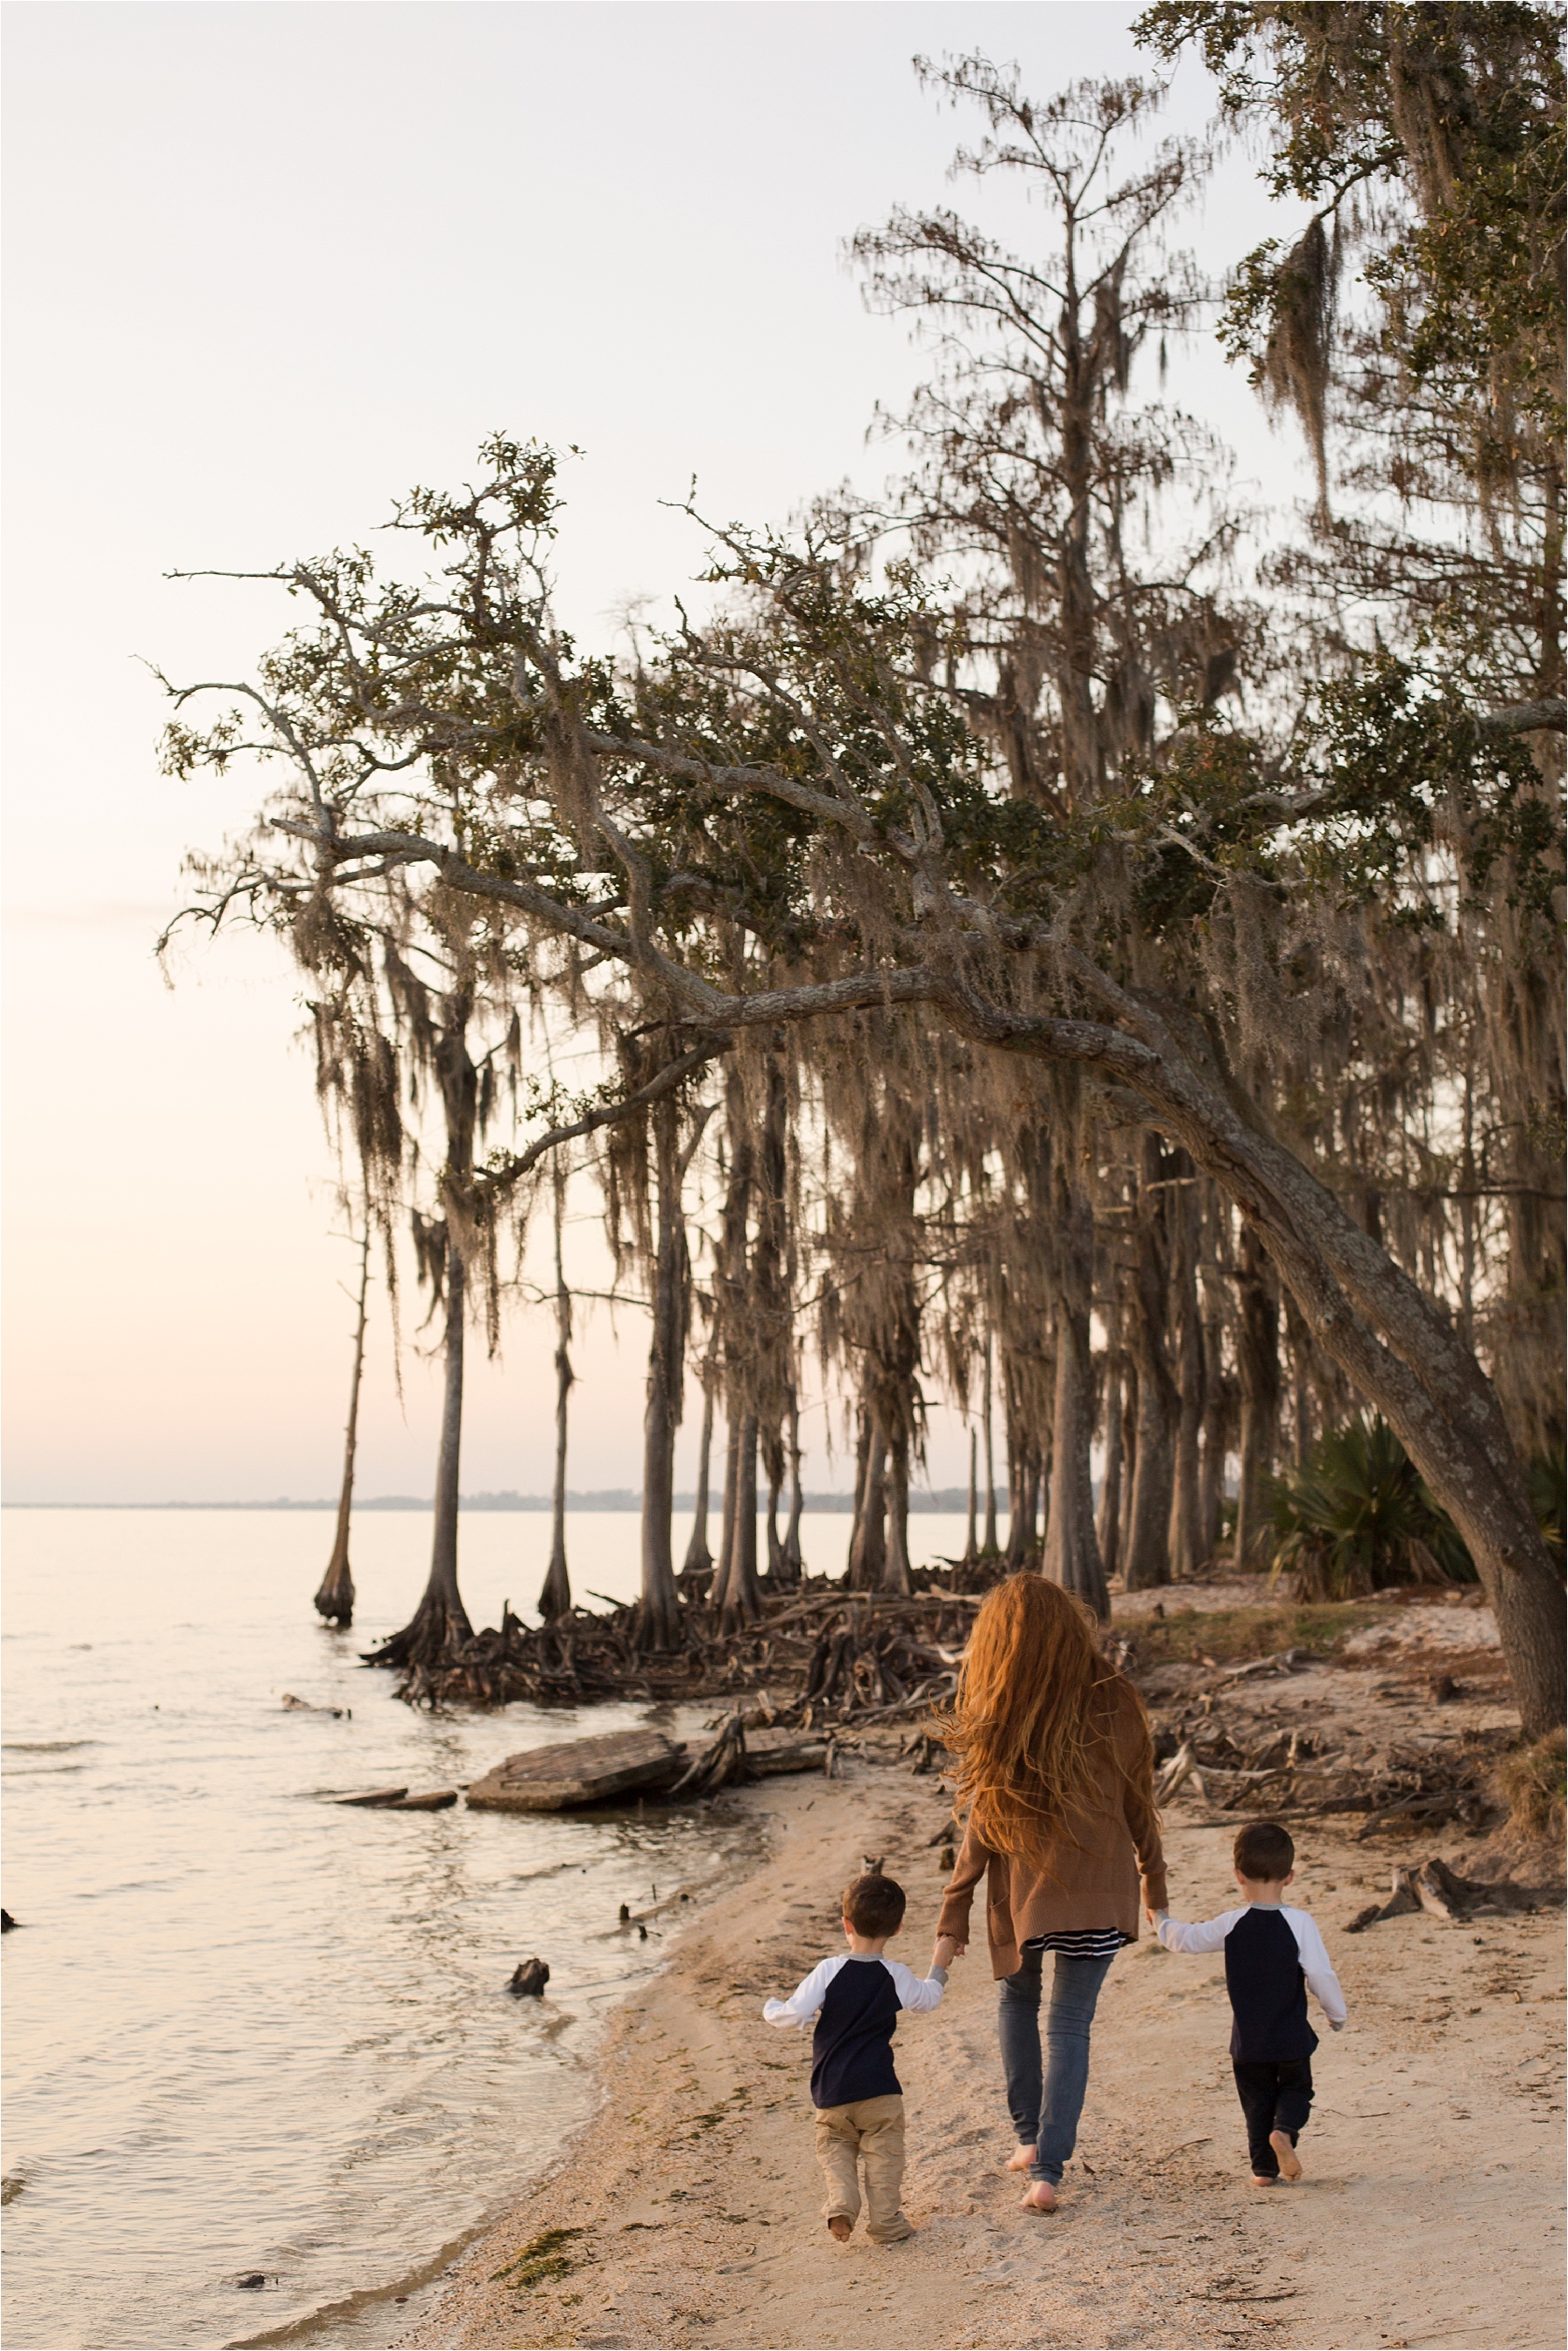 fontainebleau state park family session